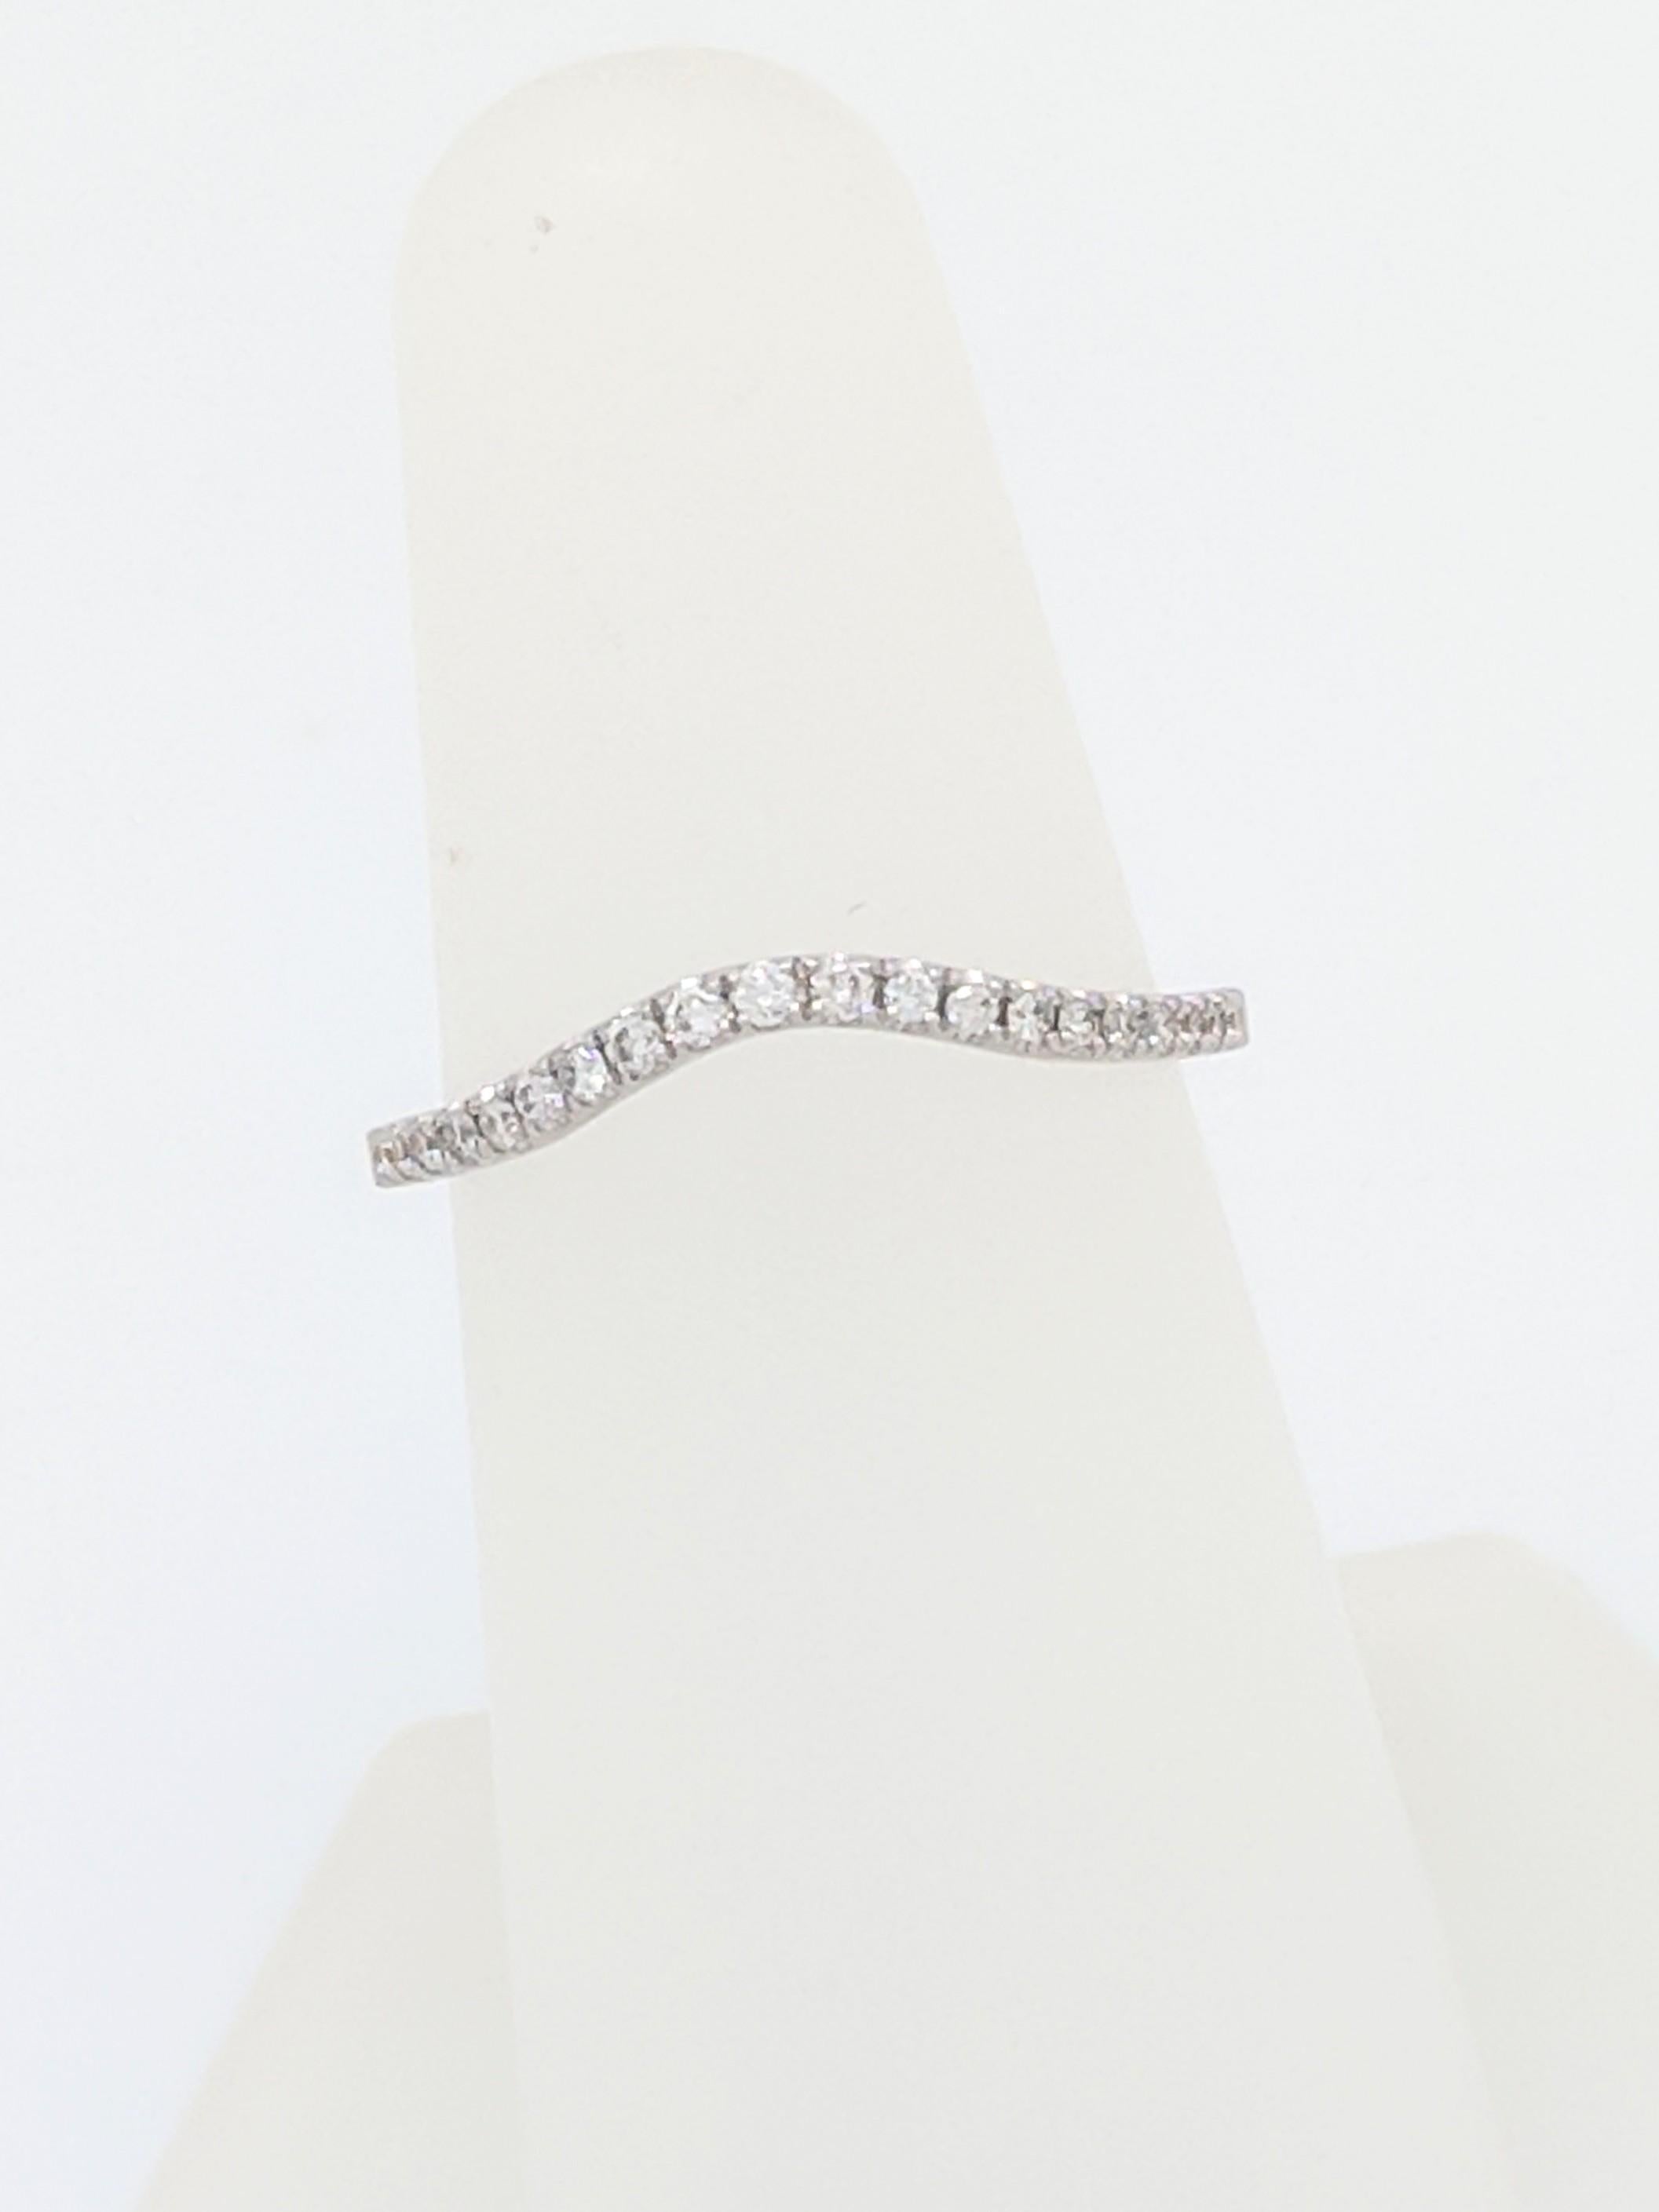 You are viewing a Beautiful Curved Diamond Wedding Band. This band is crafted from 18k white gold and weigh 1.7 grams. This ring features (21) natural round brilliant cut diamonds that are individually prong set for a total carat weight of 0.18